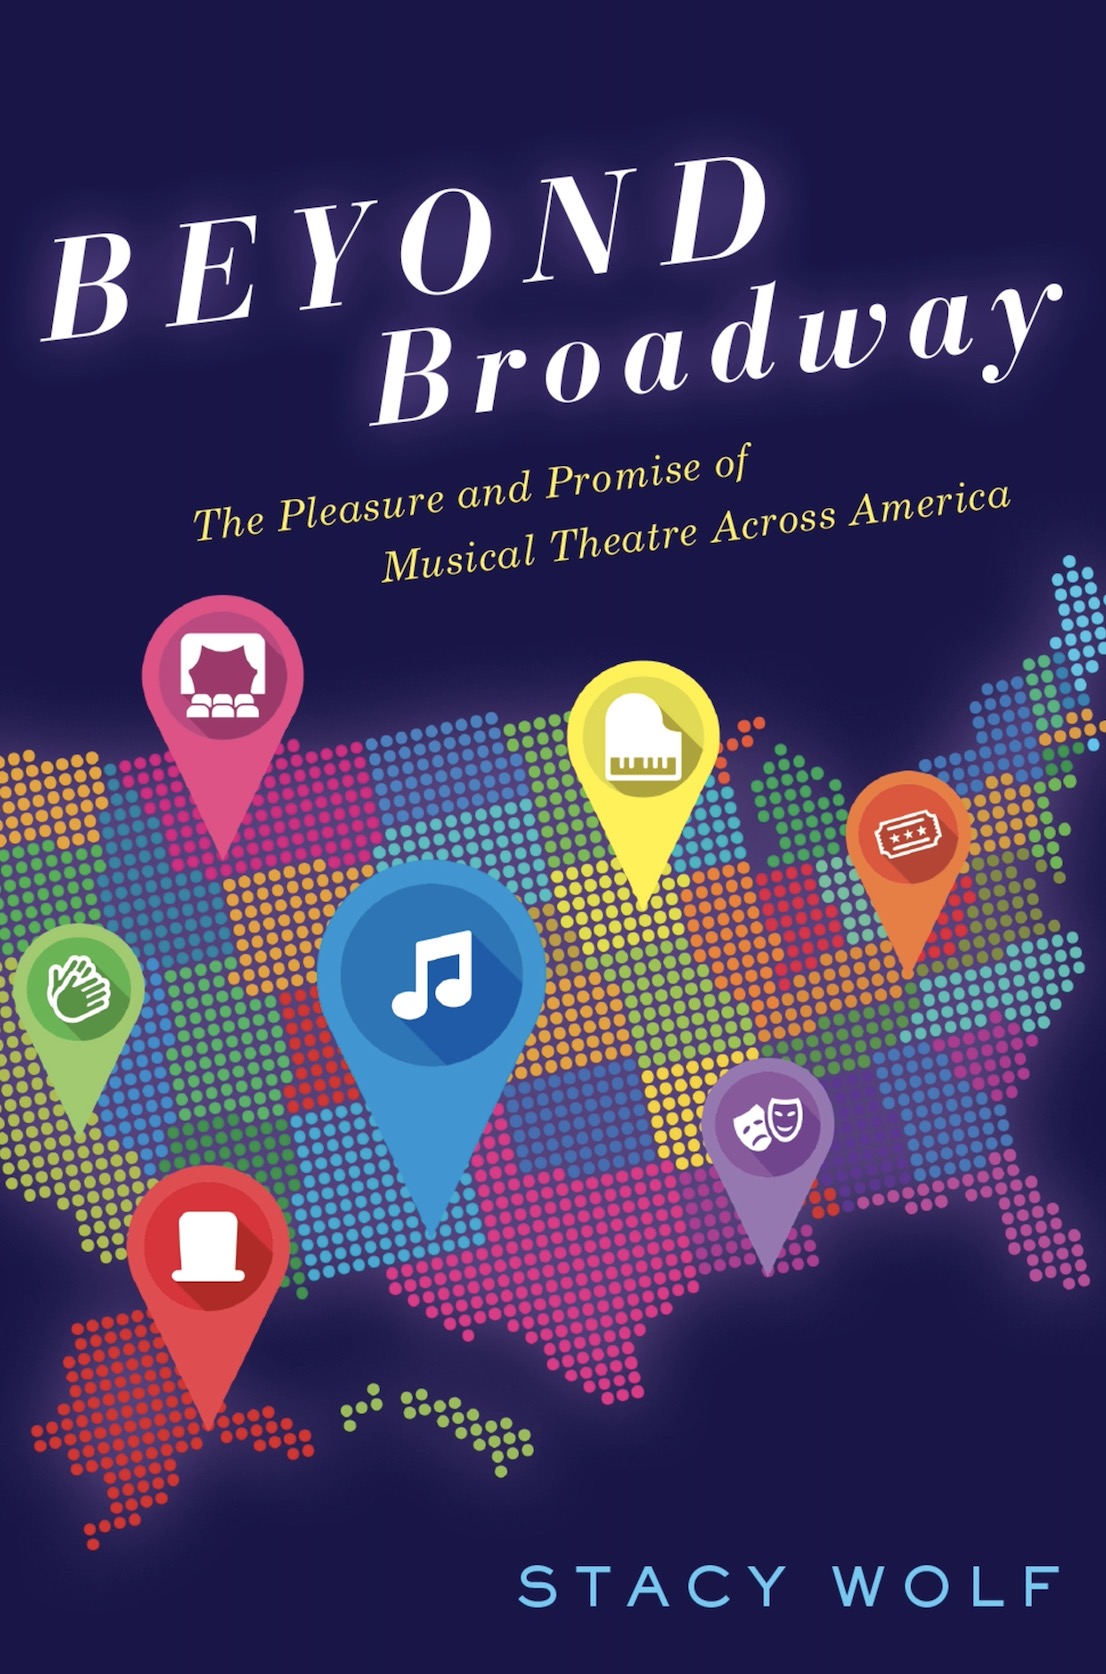 Beyond Broadway: The Pleasure and Promise of Musical Theatre Across America by Stacy Wolf